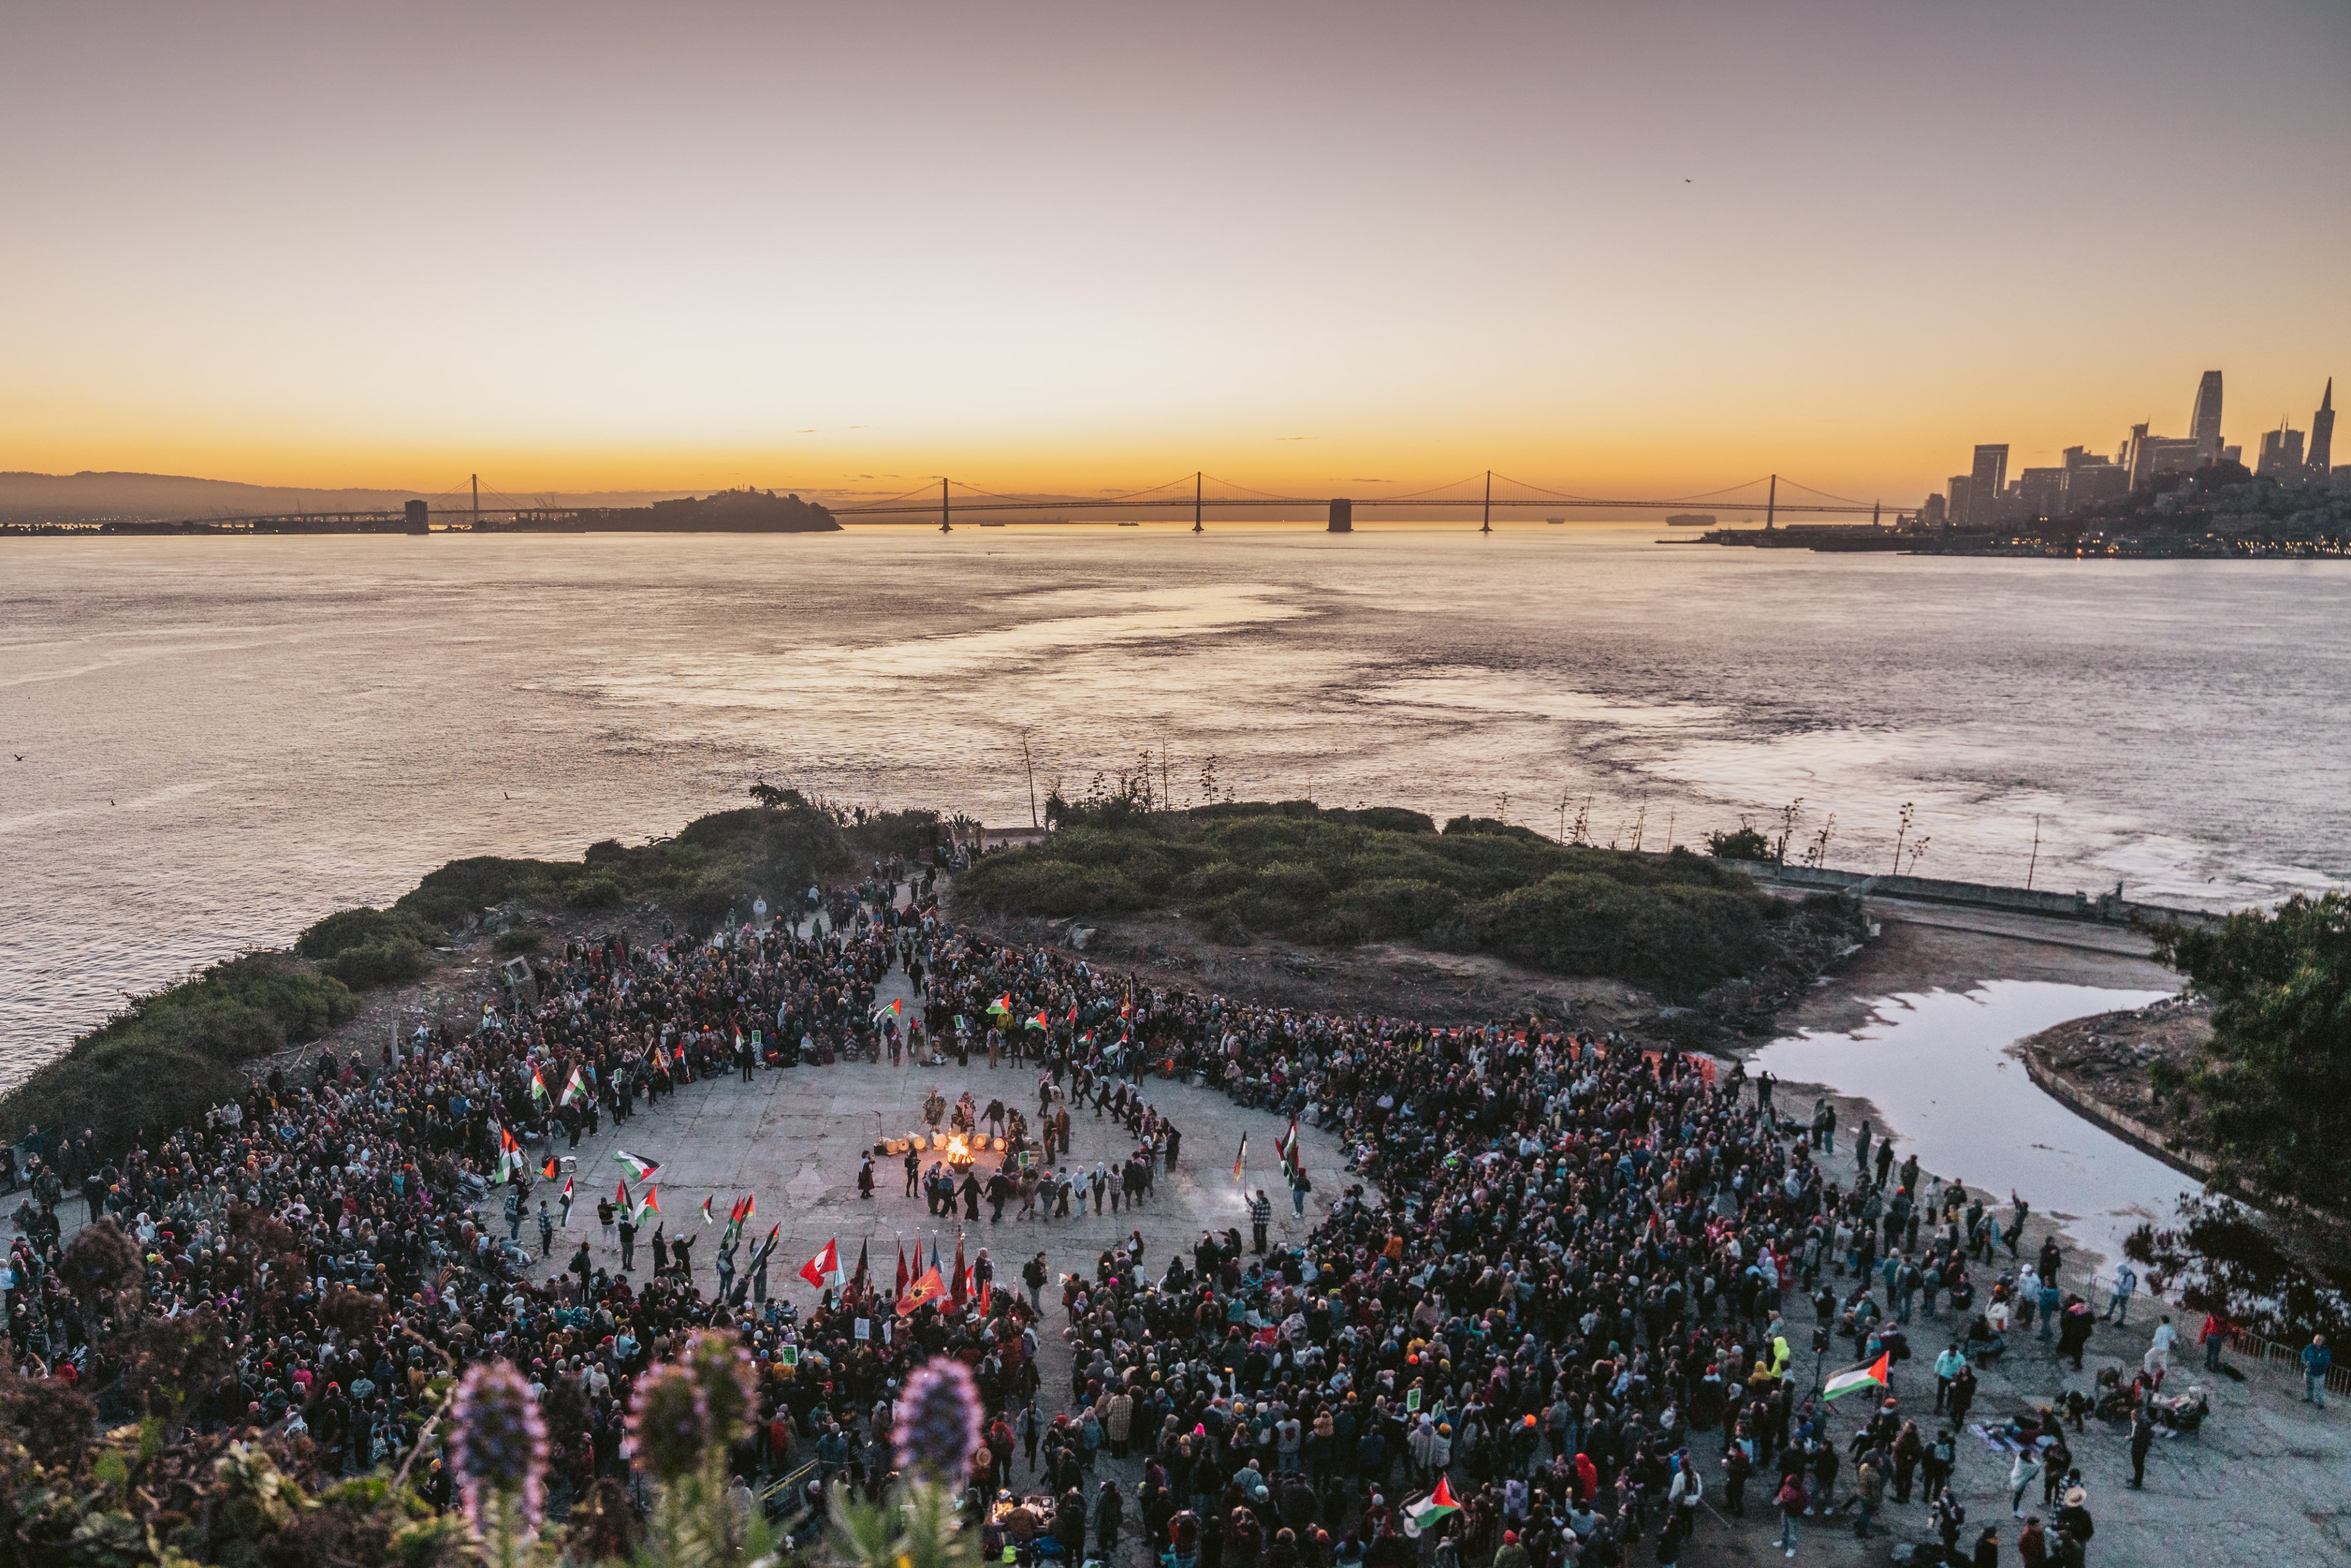 An overhead view of a crowd watching ceremonial dancing on an island with a view of San Francisco across the bay.